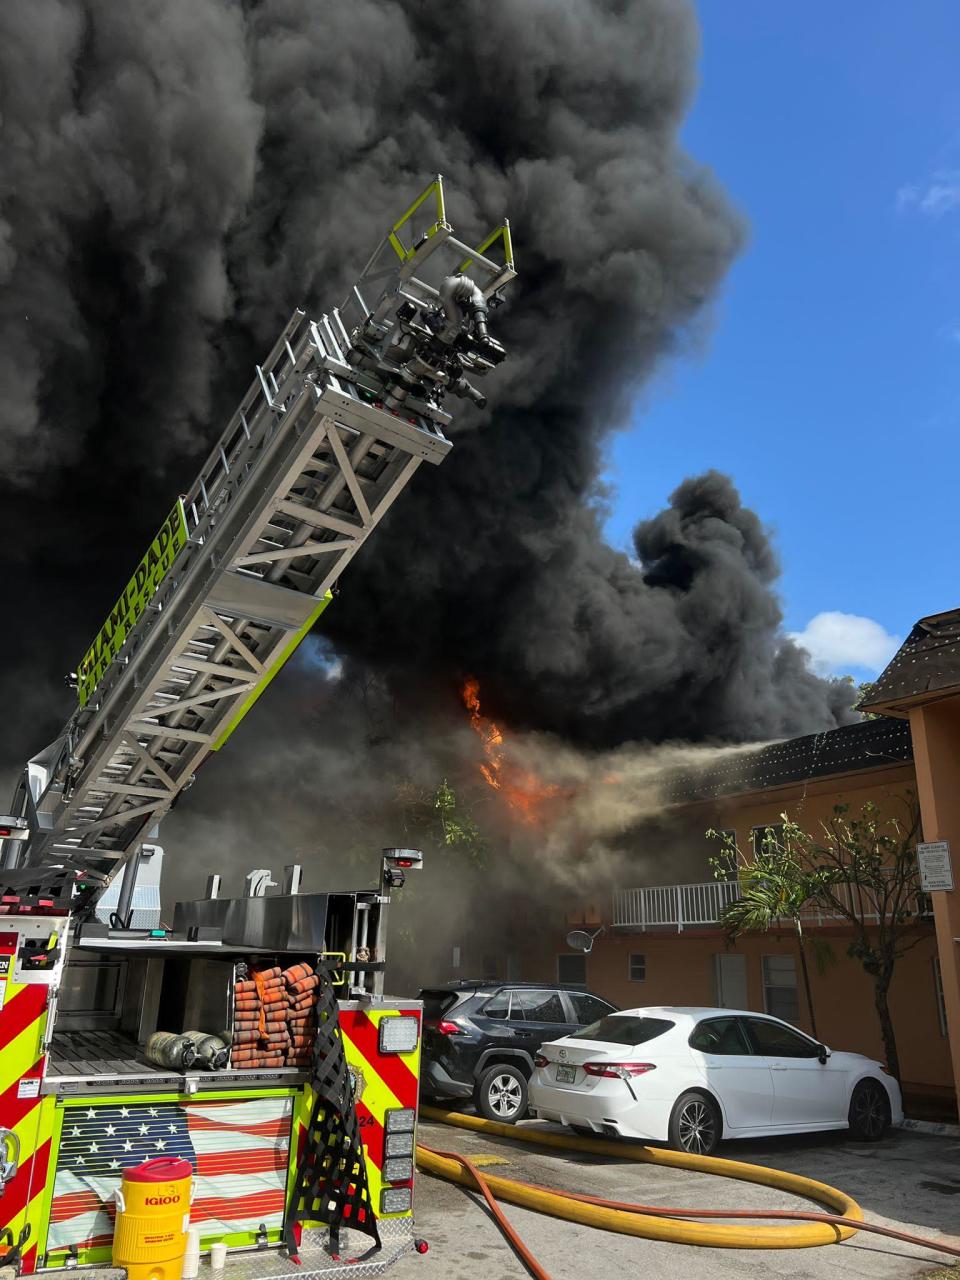 Miami Dade Fire Rescue teams respond to heavy fire that displaced 105 residents. / Credit: Miami-Dade Fire Rescue